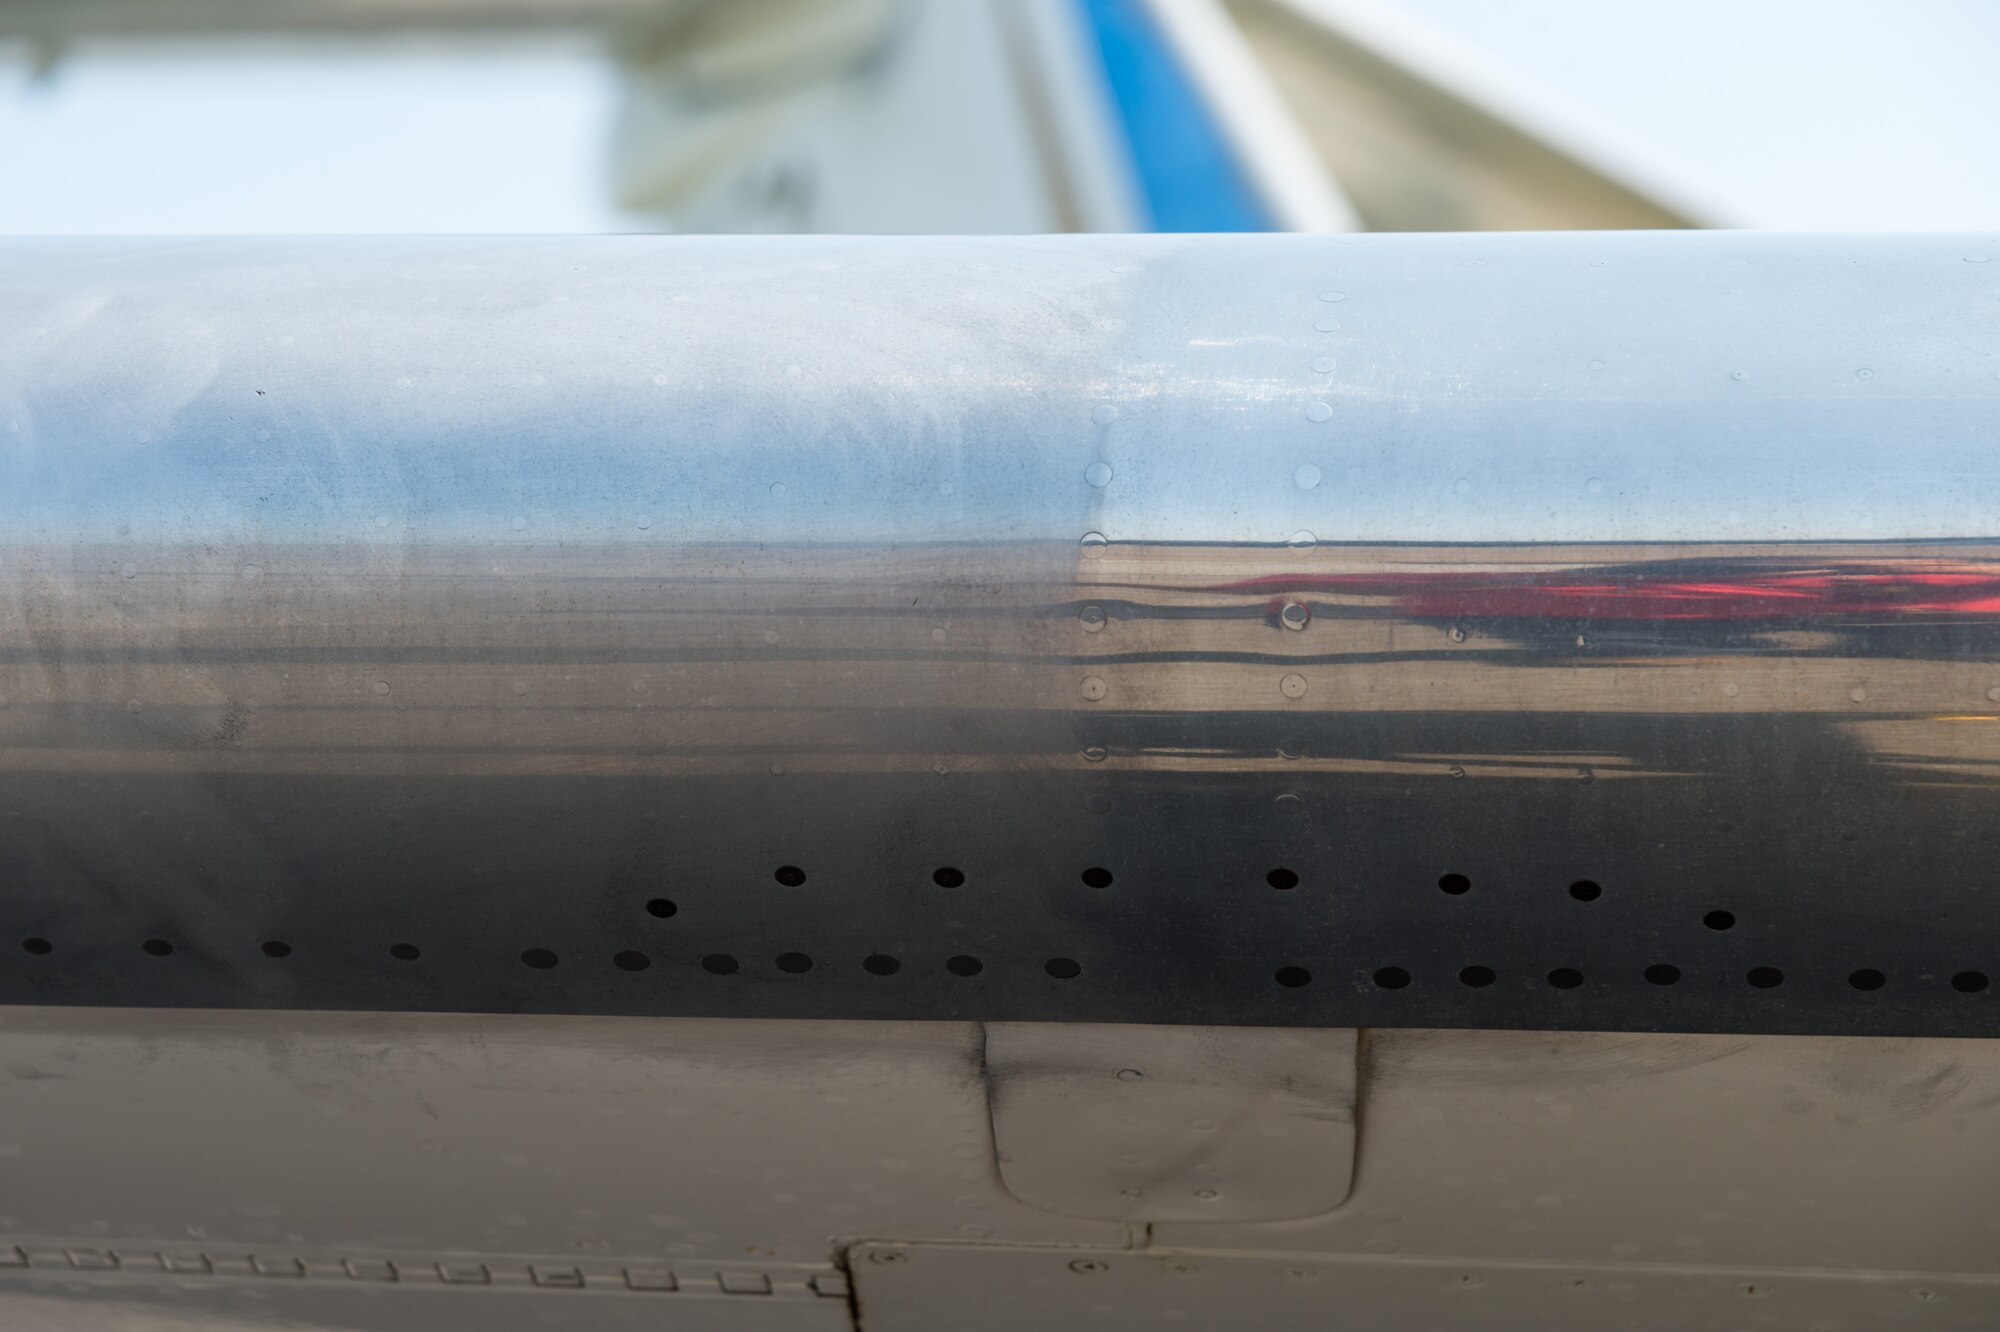 The leading edge on the right wing of the Air Force Two, a McDonnell Douglas VC-9C, shows cleaning compound applied on the left side Aug. 25, 2020, at Air Mobility Command Museum on Dover Air Force Base, Delaware. Eleven volunteers from the 436th Maintenance Squadron aircraft hydraulic section, stripped, cleaned and polished the shiny aluminum skin of the aircraft. (U.S. Air Force photo by Roland Balik)